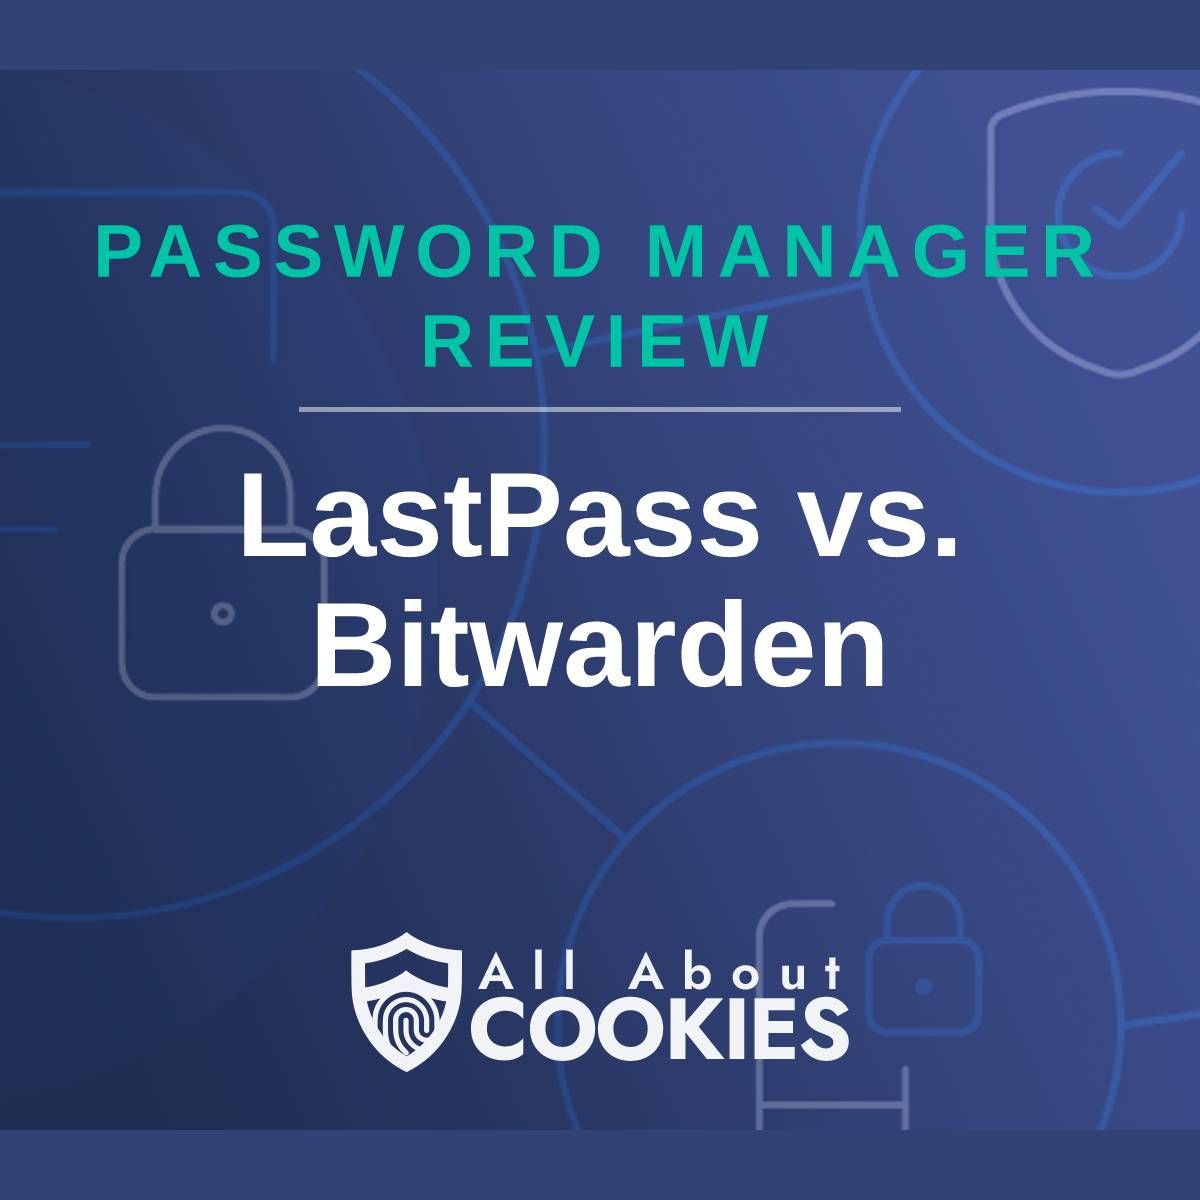 A blue background with images of locks and shields with the text "Password Manager Review LastPass vs. Bitwarden" and the All About Cookies logo. 